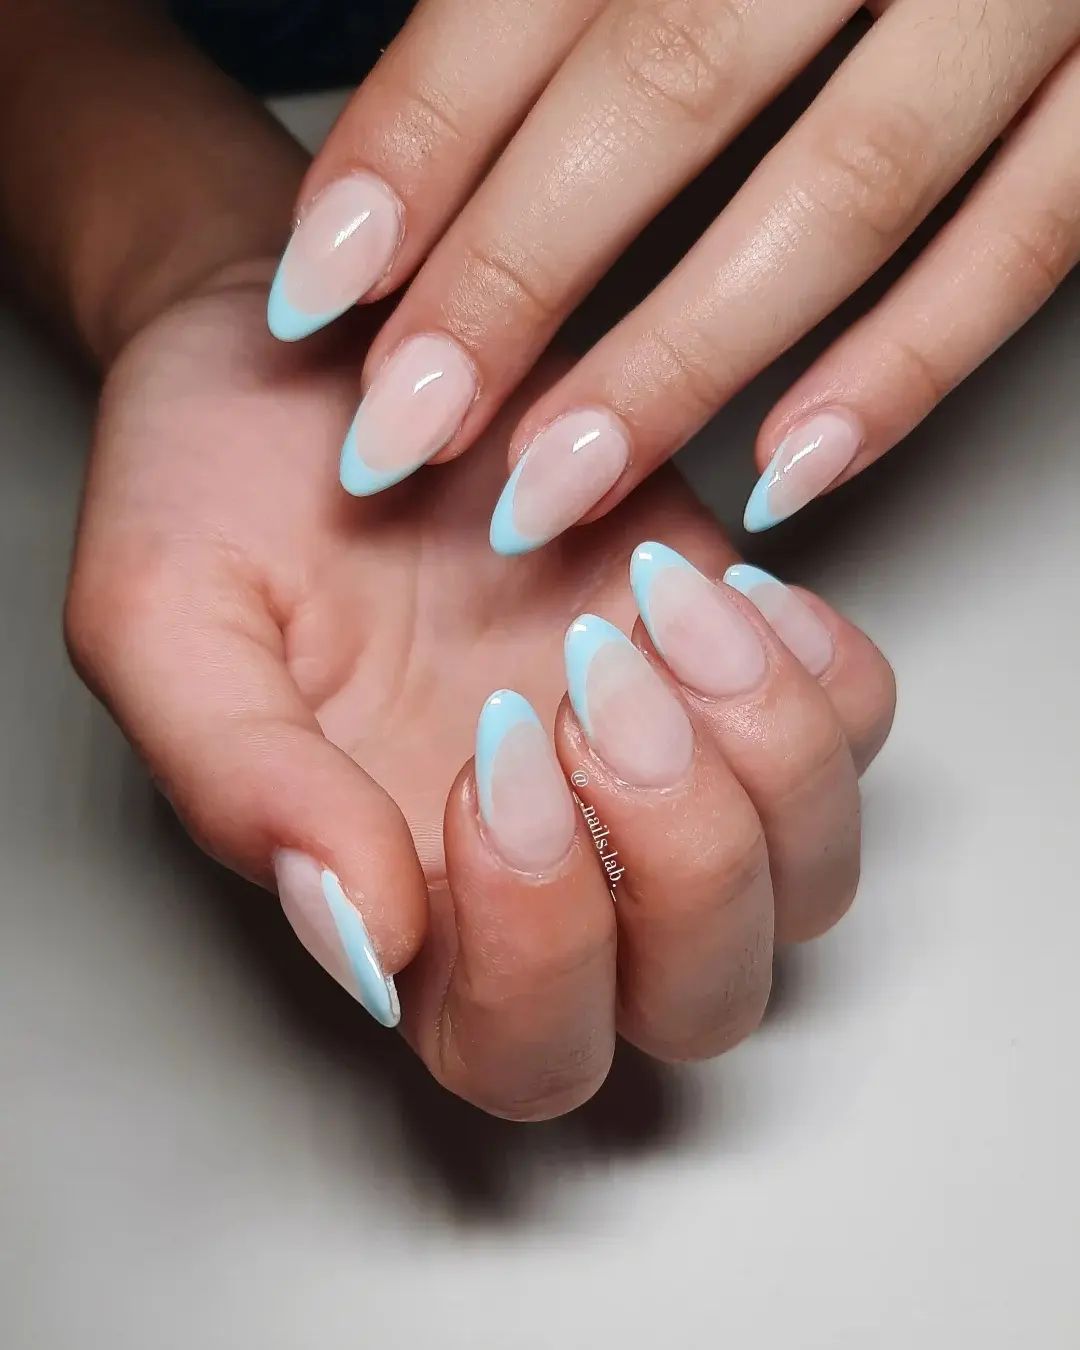 Colorful French tips are on trend so why not using light blue color as French tips? It will look amazing on your nails for sure.